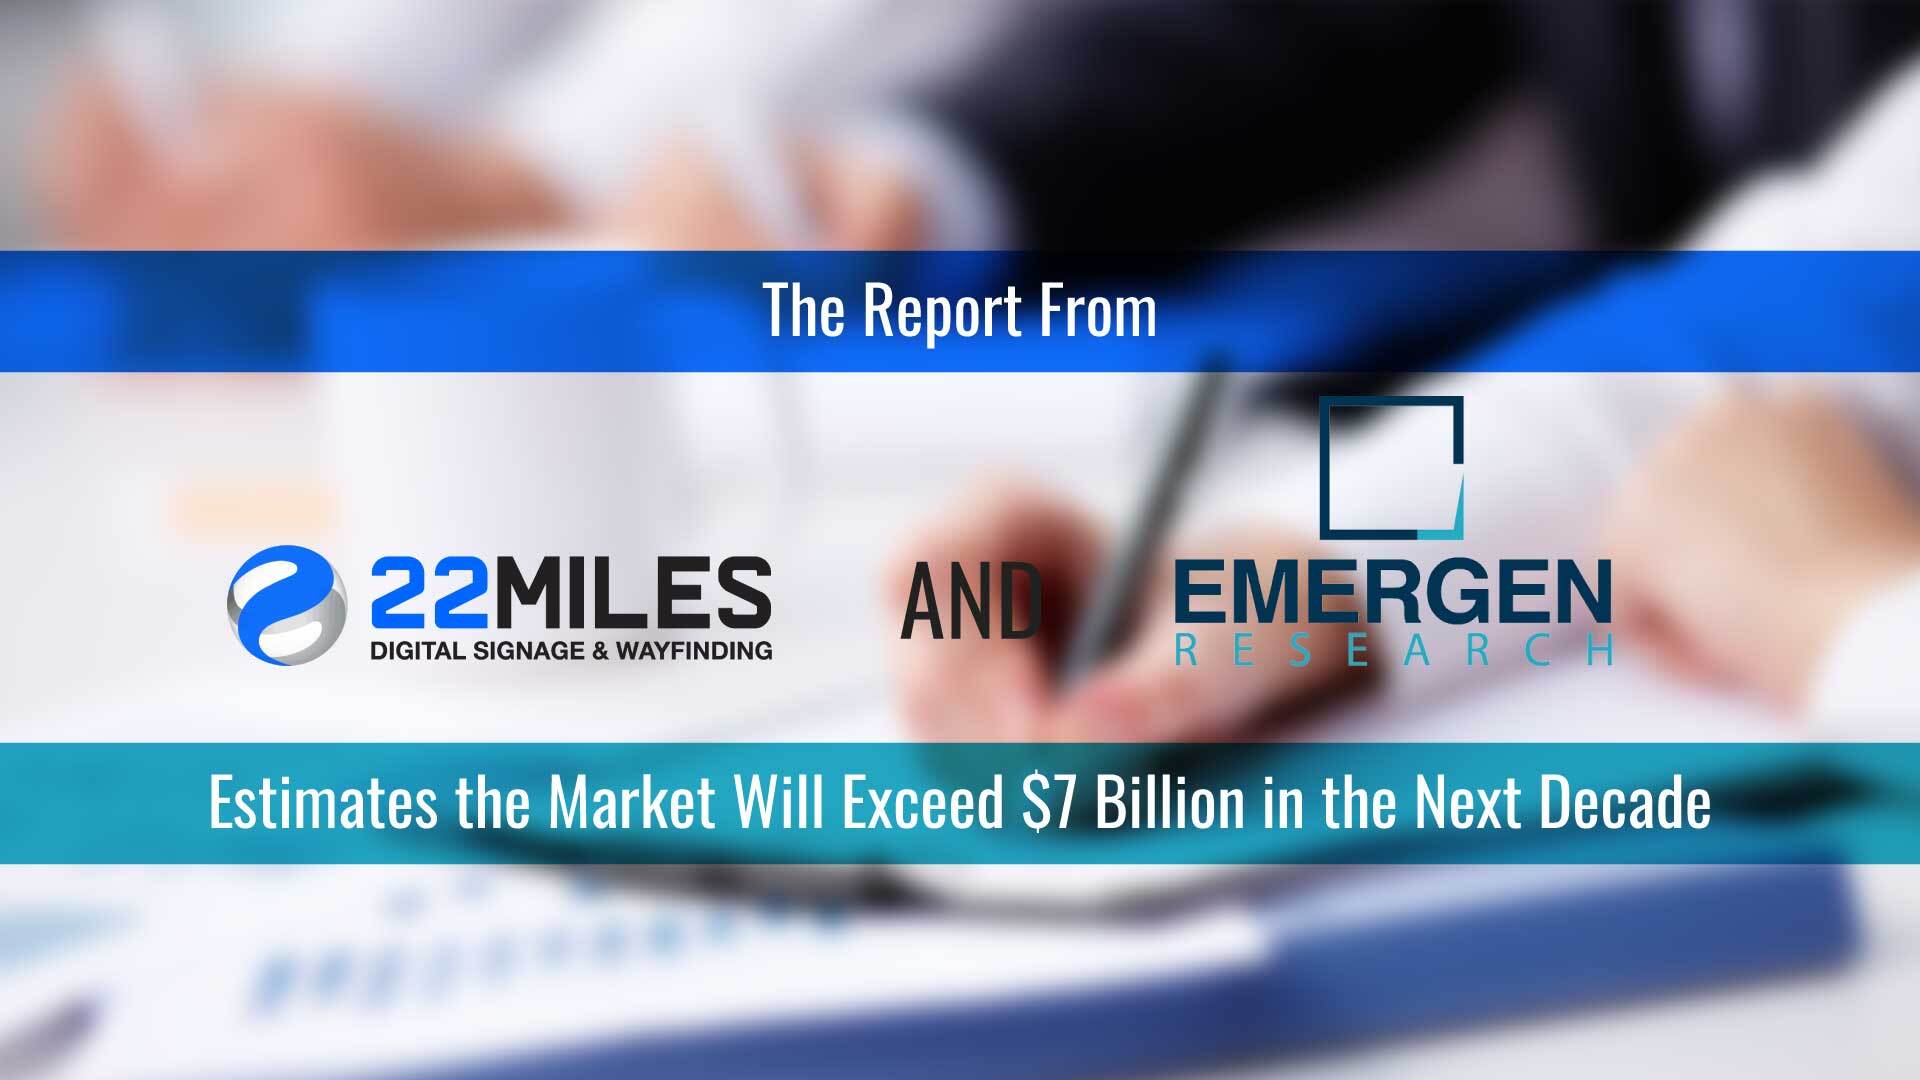 New Market Research Forecasts Bullish Growth for Digital Signage Software Sector